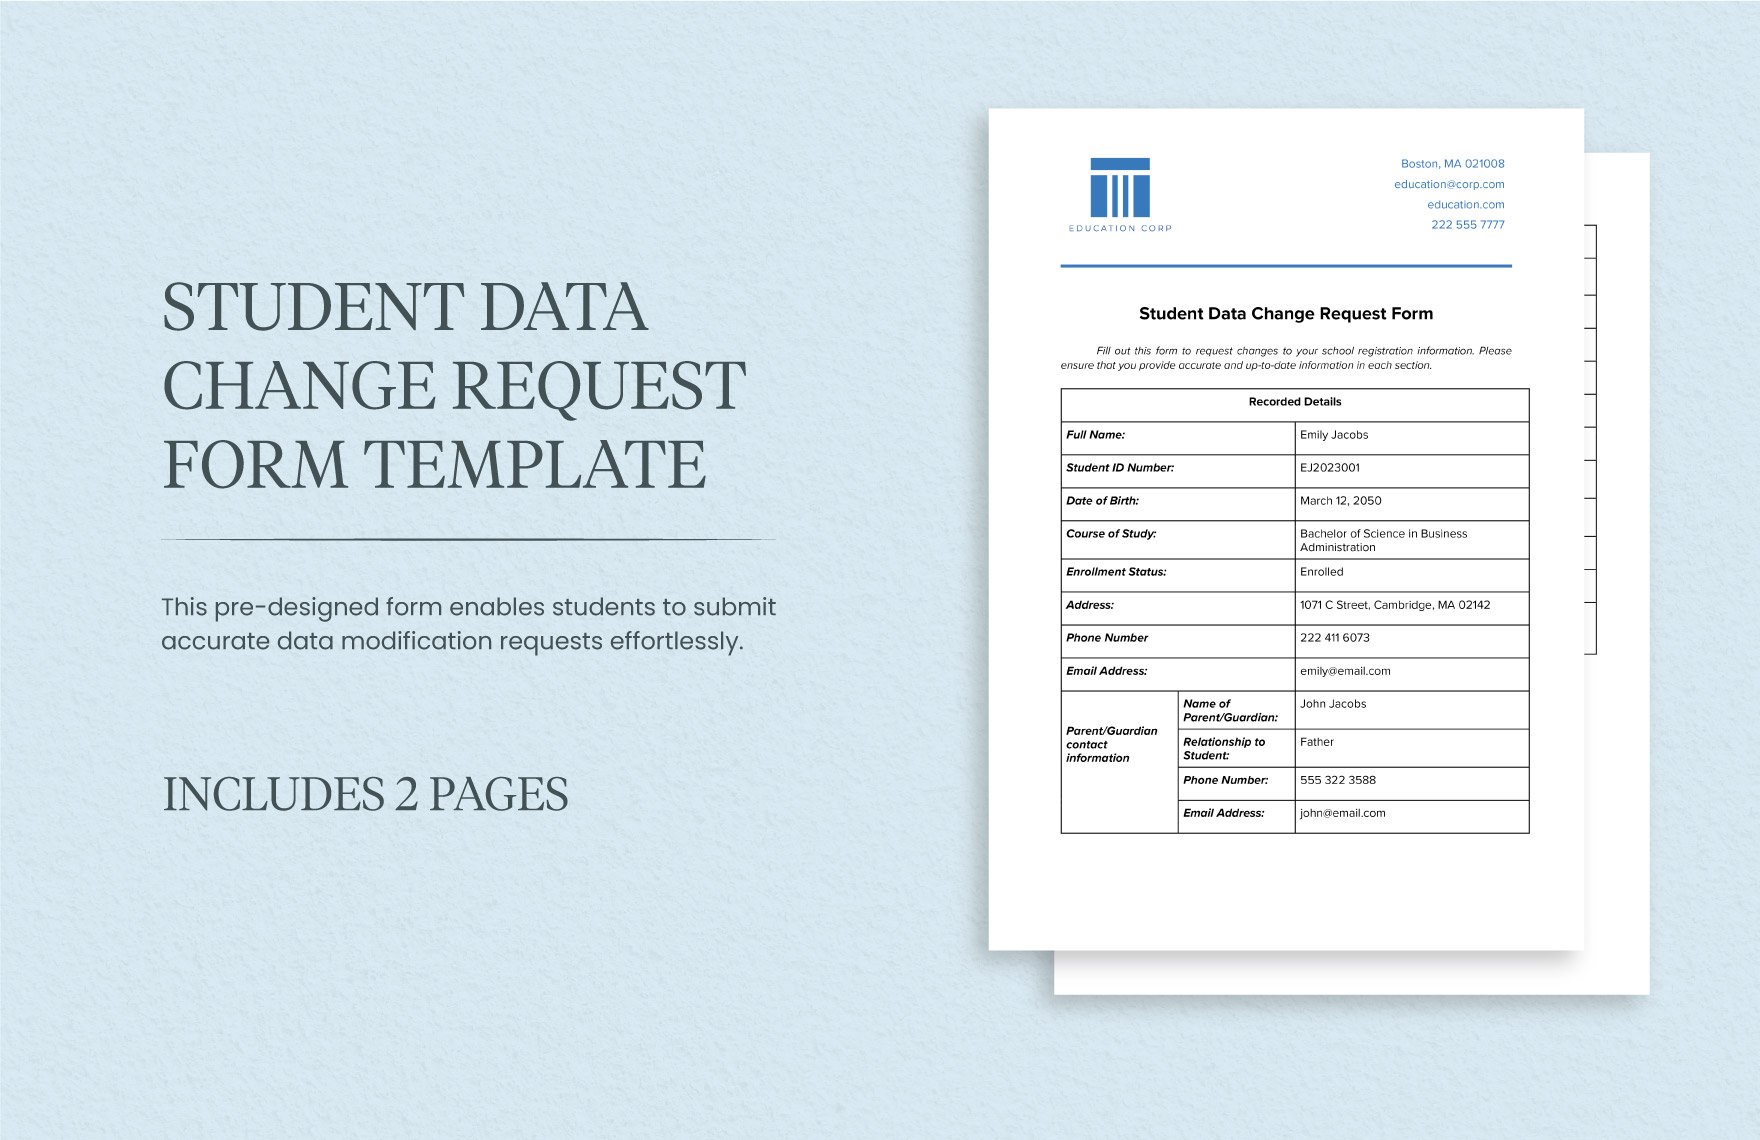 Student Data Change Request Form Template